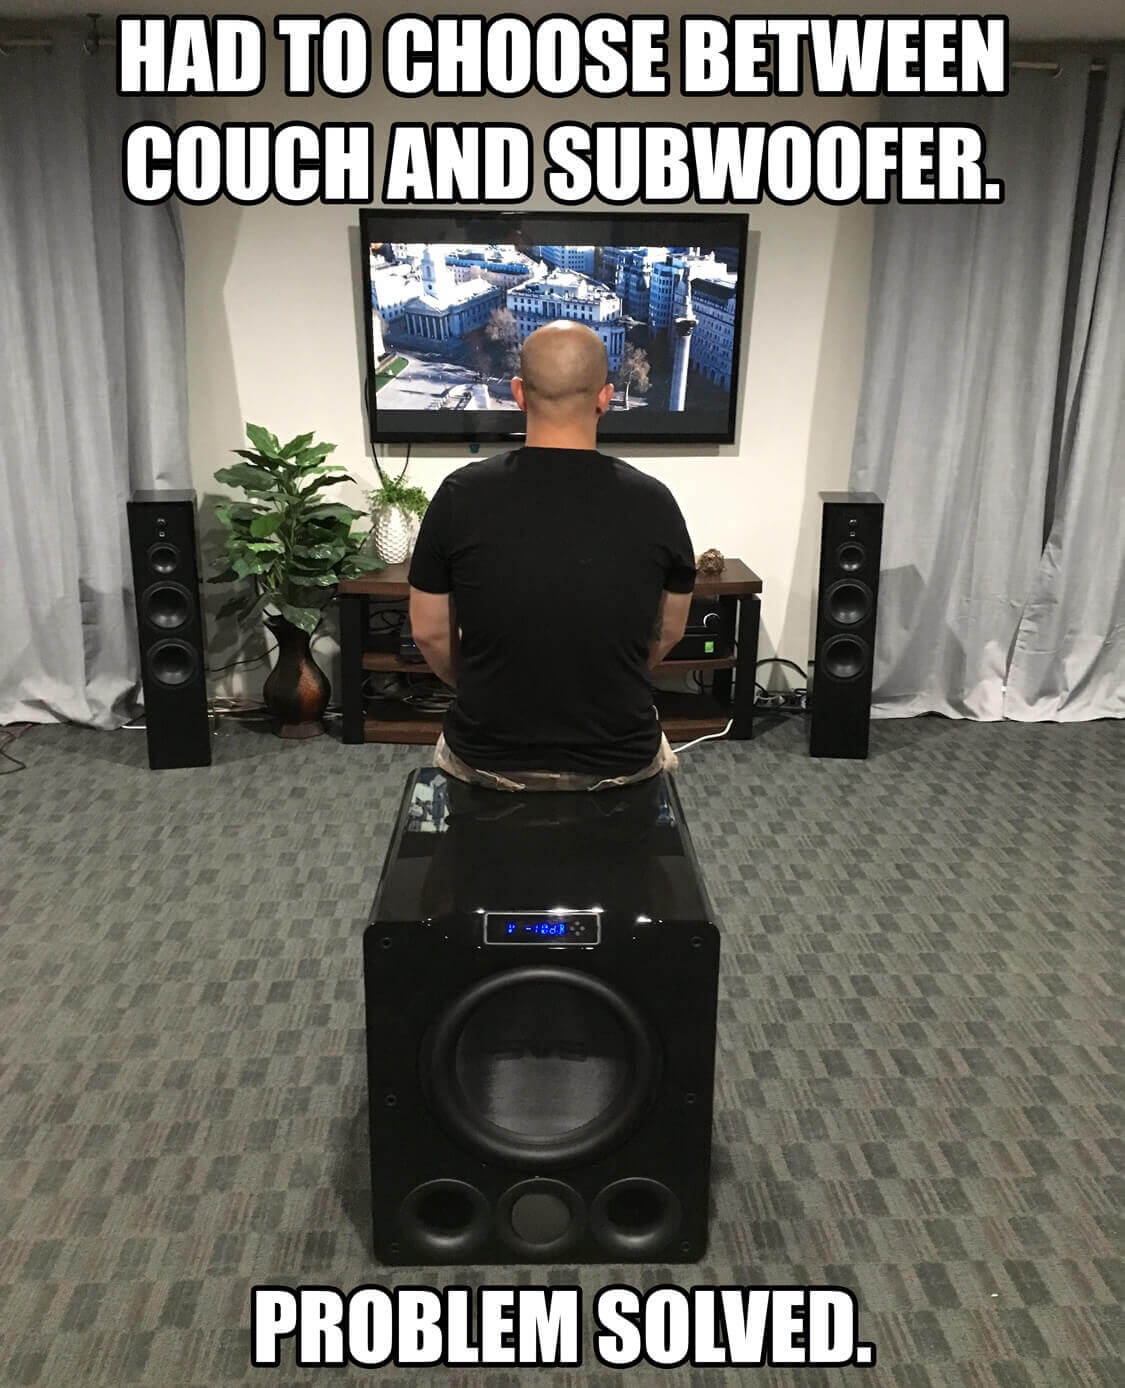 Choosing between a couch and subs is an easy choice